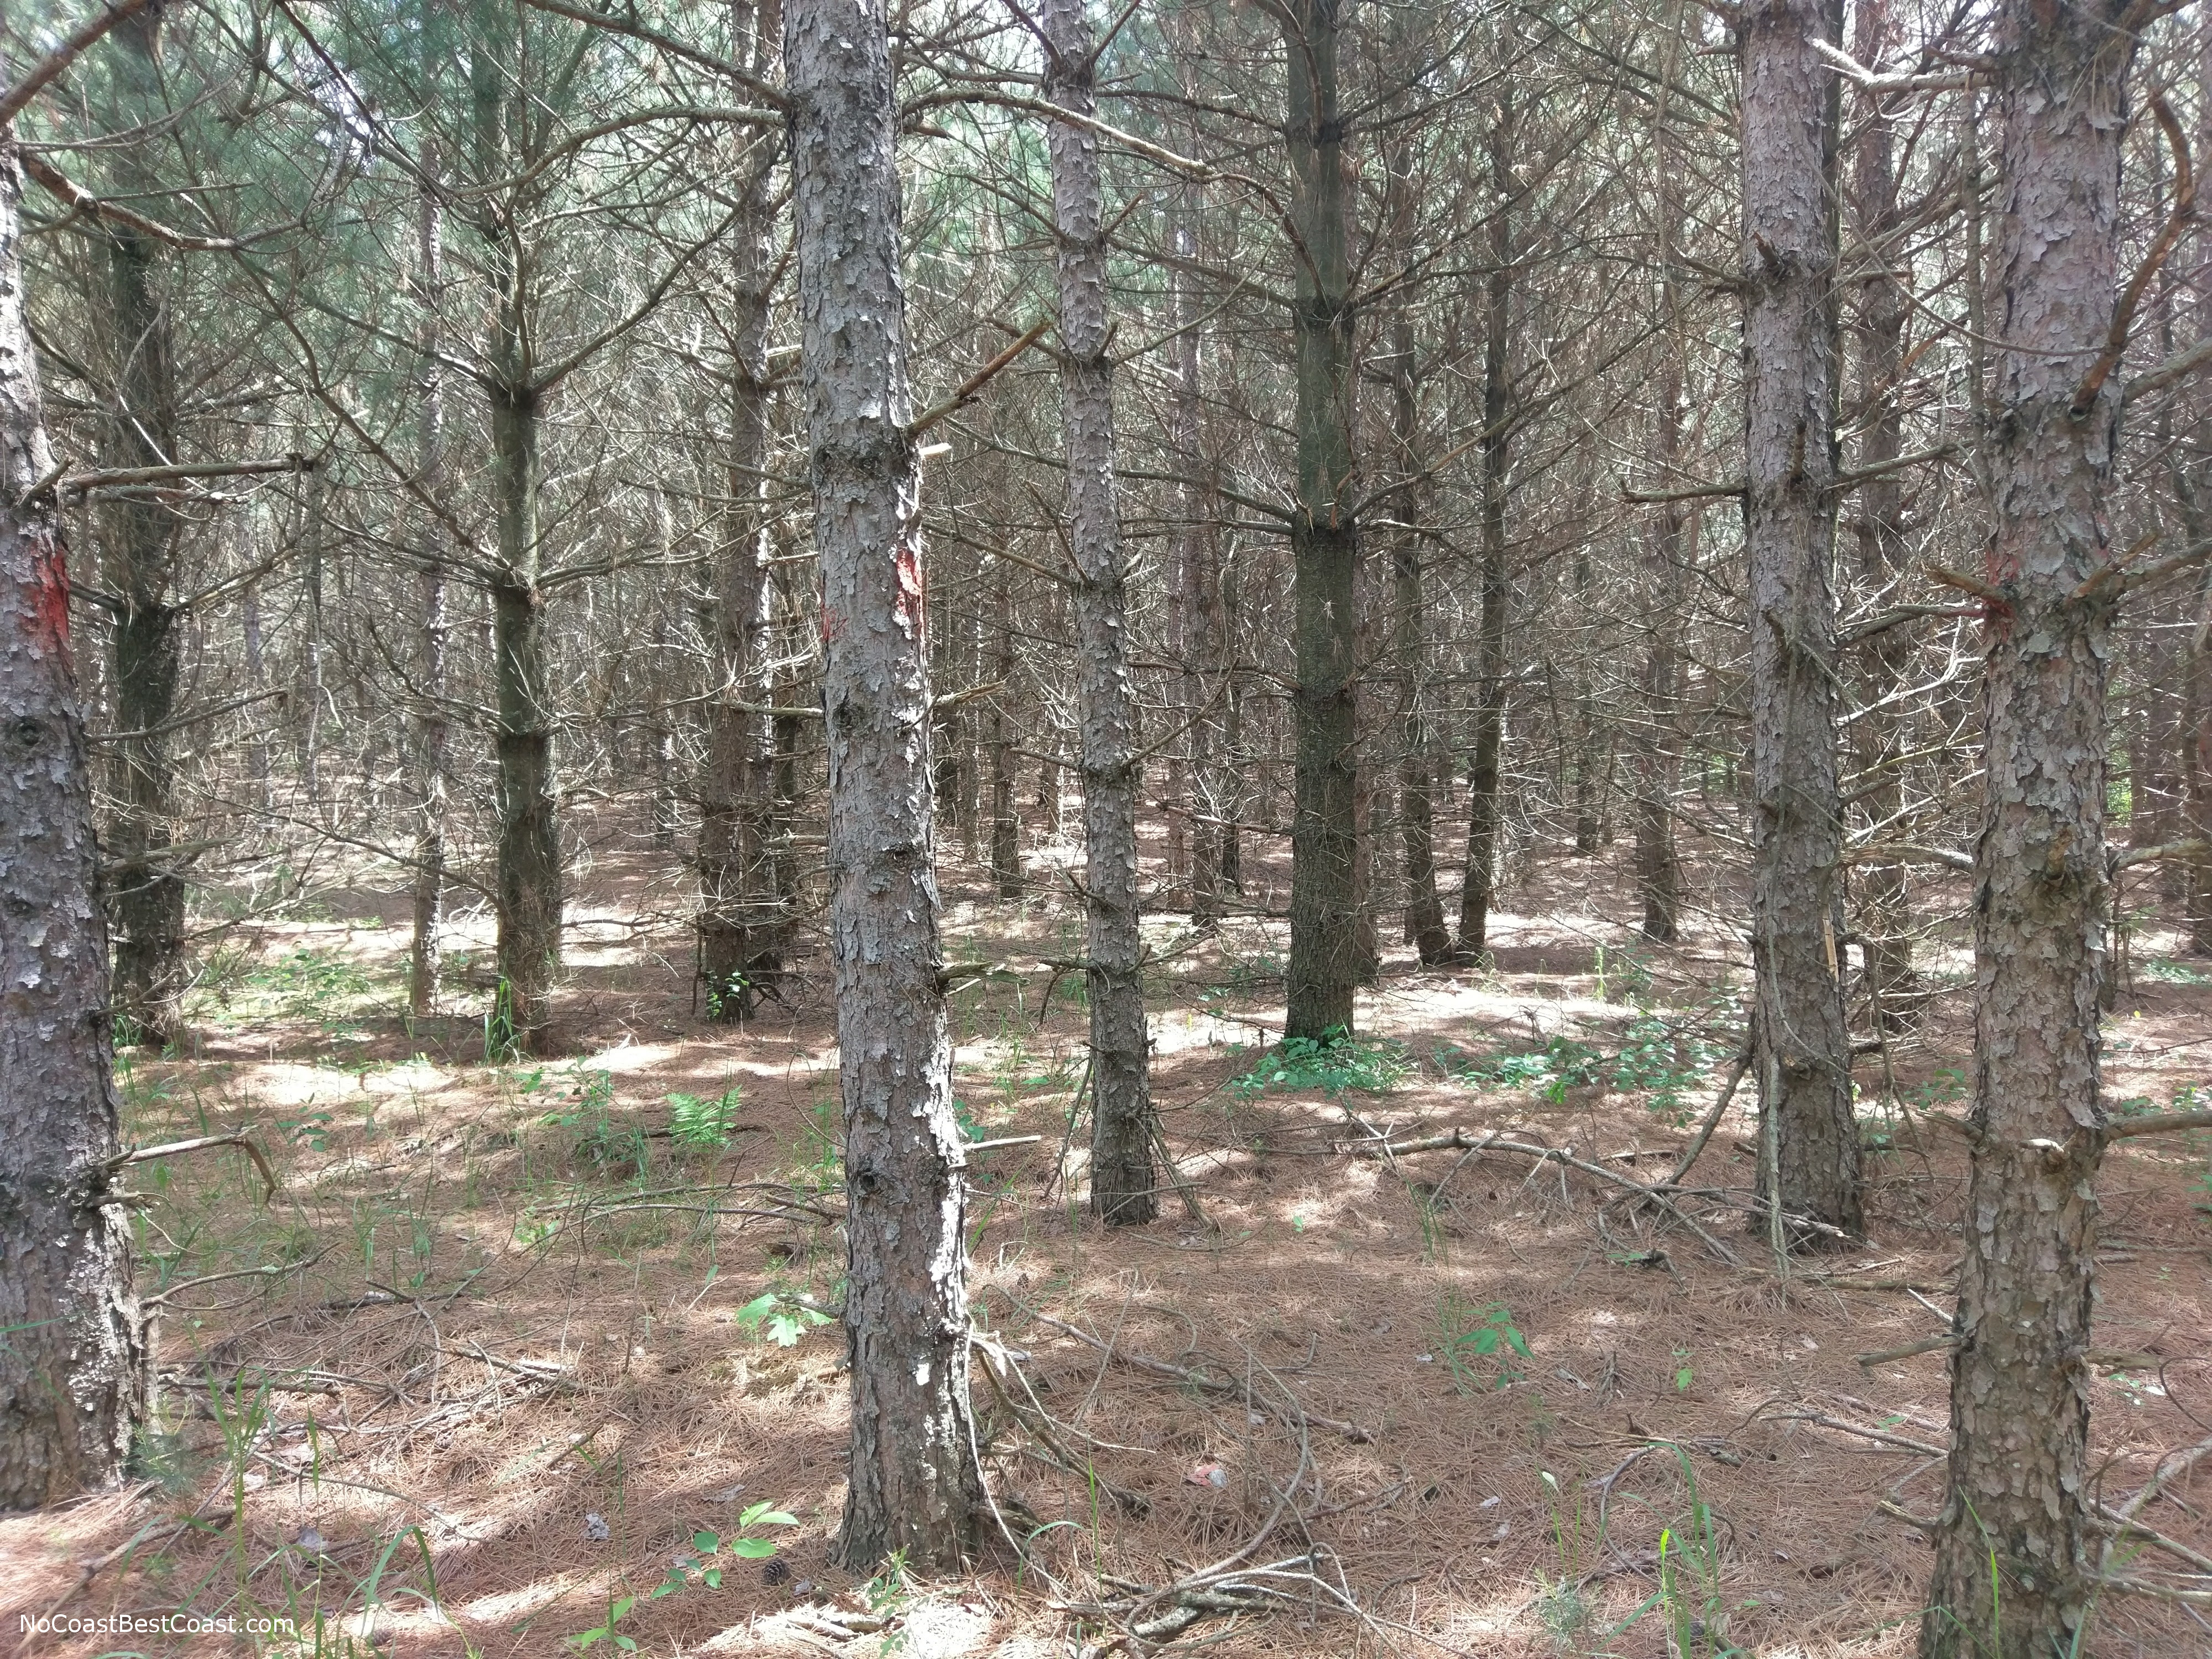 A pine forest that feels much more like the mountains in the Southwestern U.S.